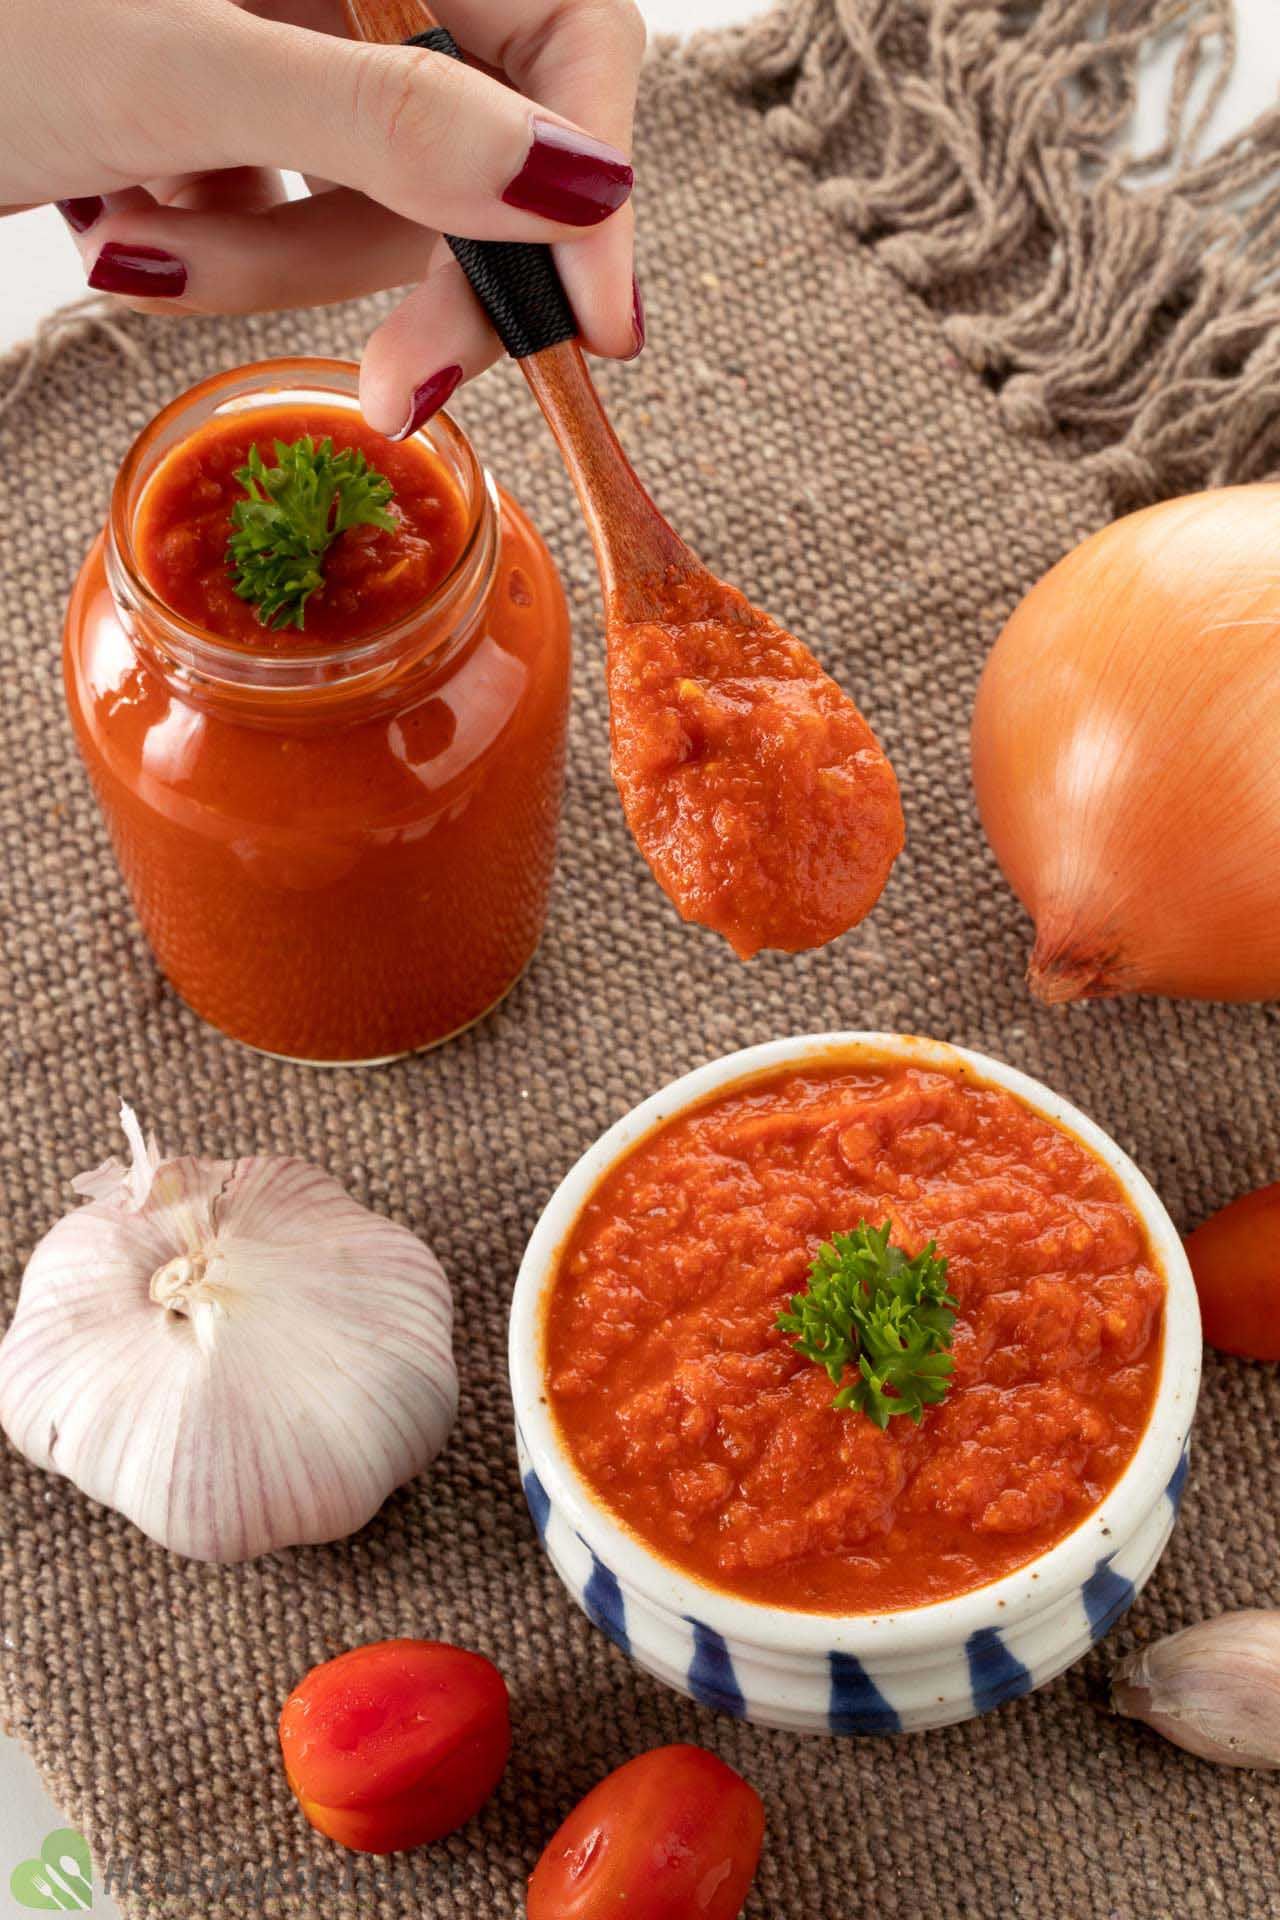 what are the best tomatoes for this sauce